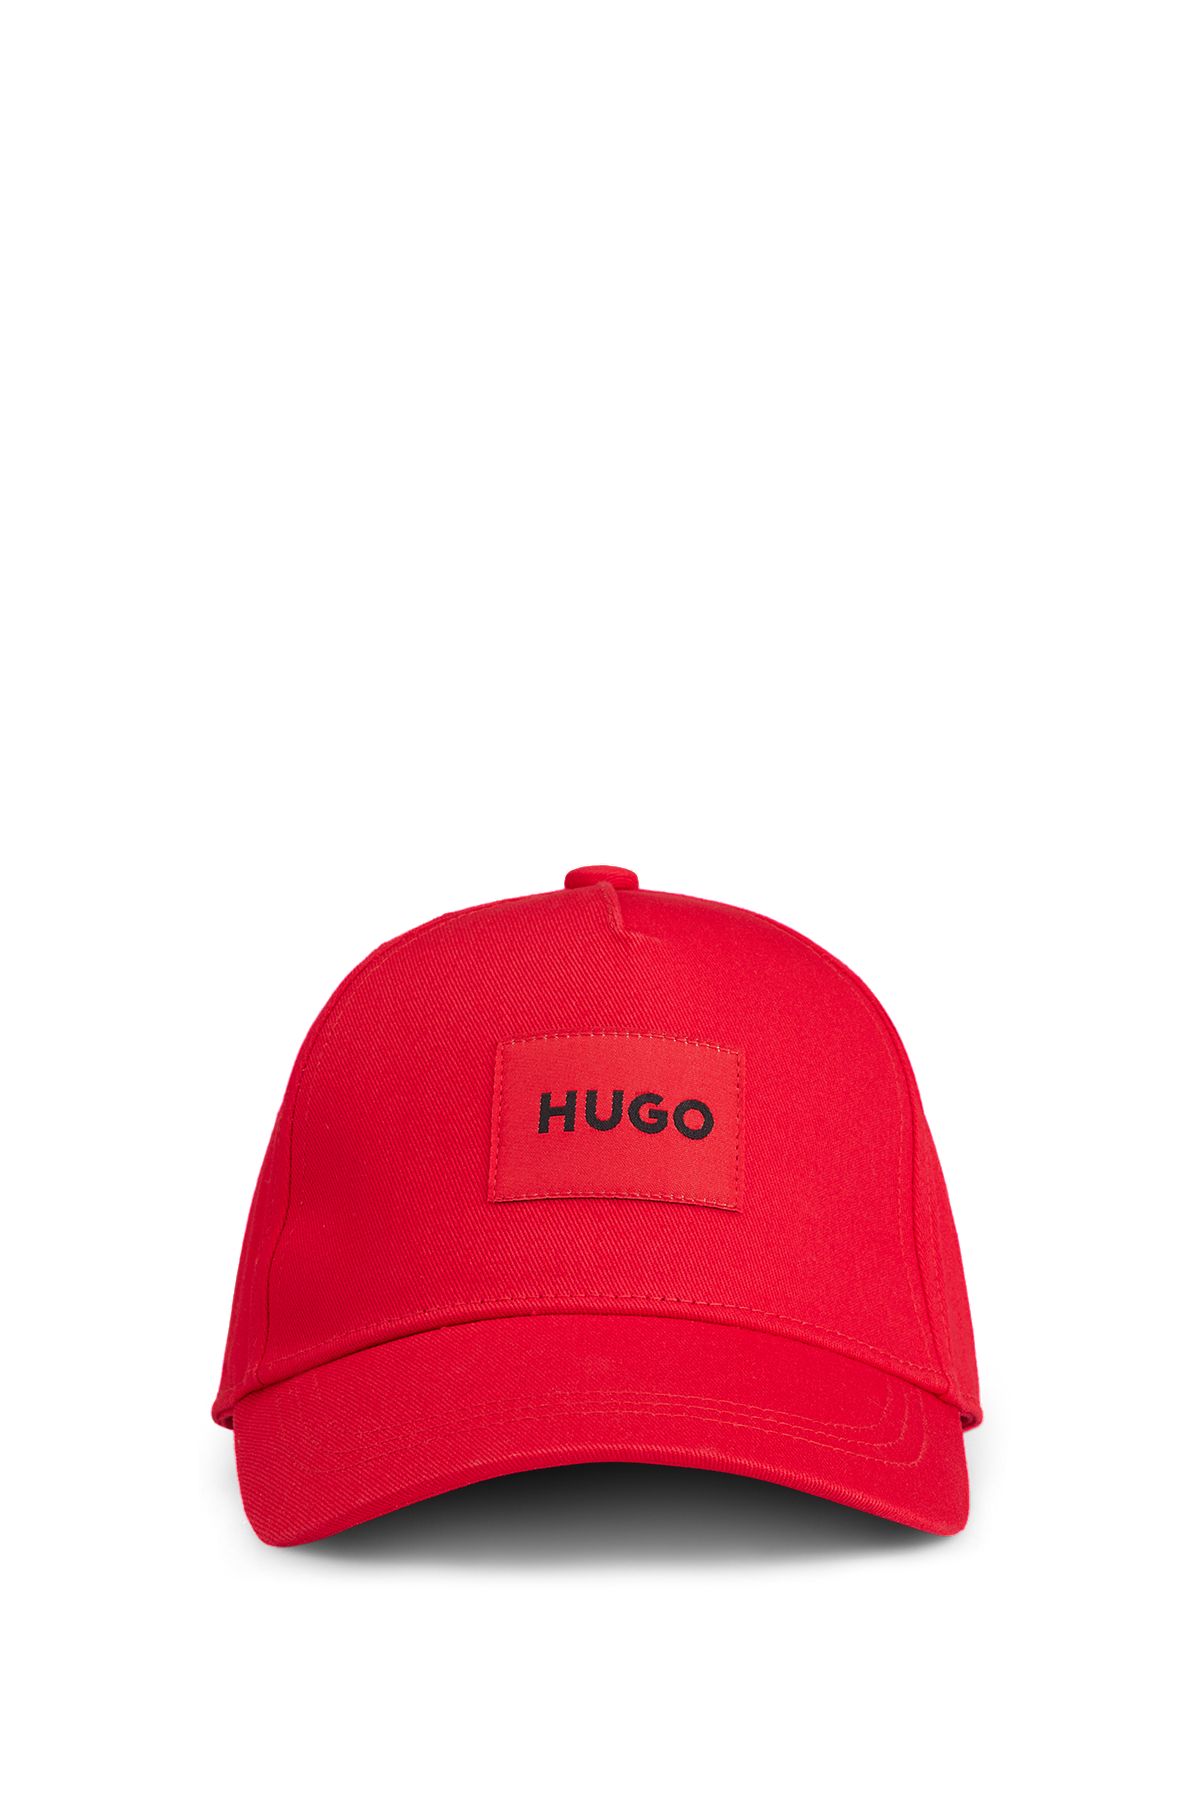 Kids' cap in cotton twill with red logo label, Red